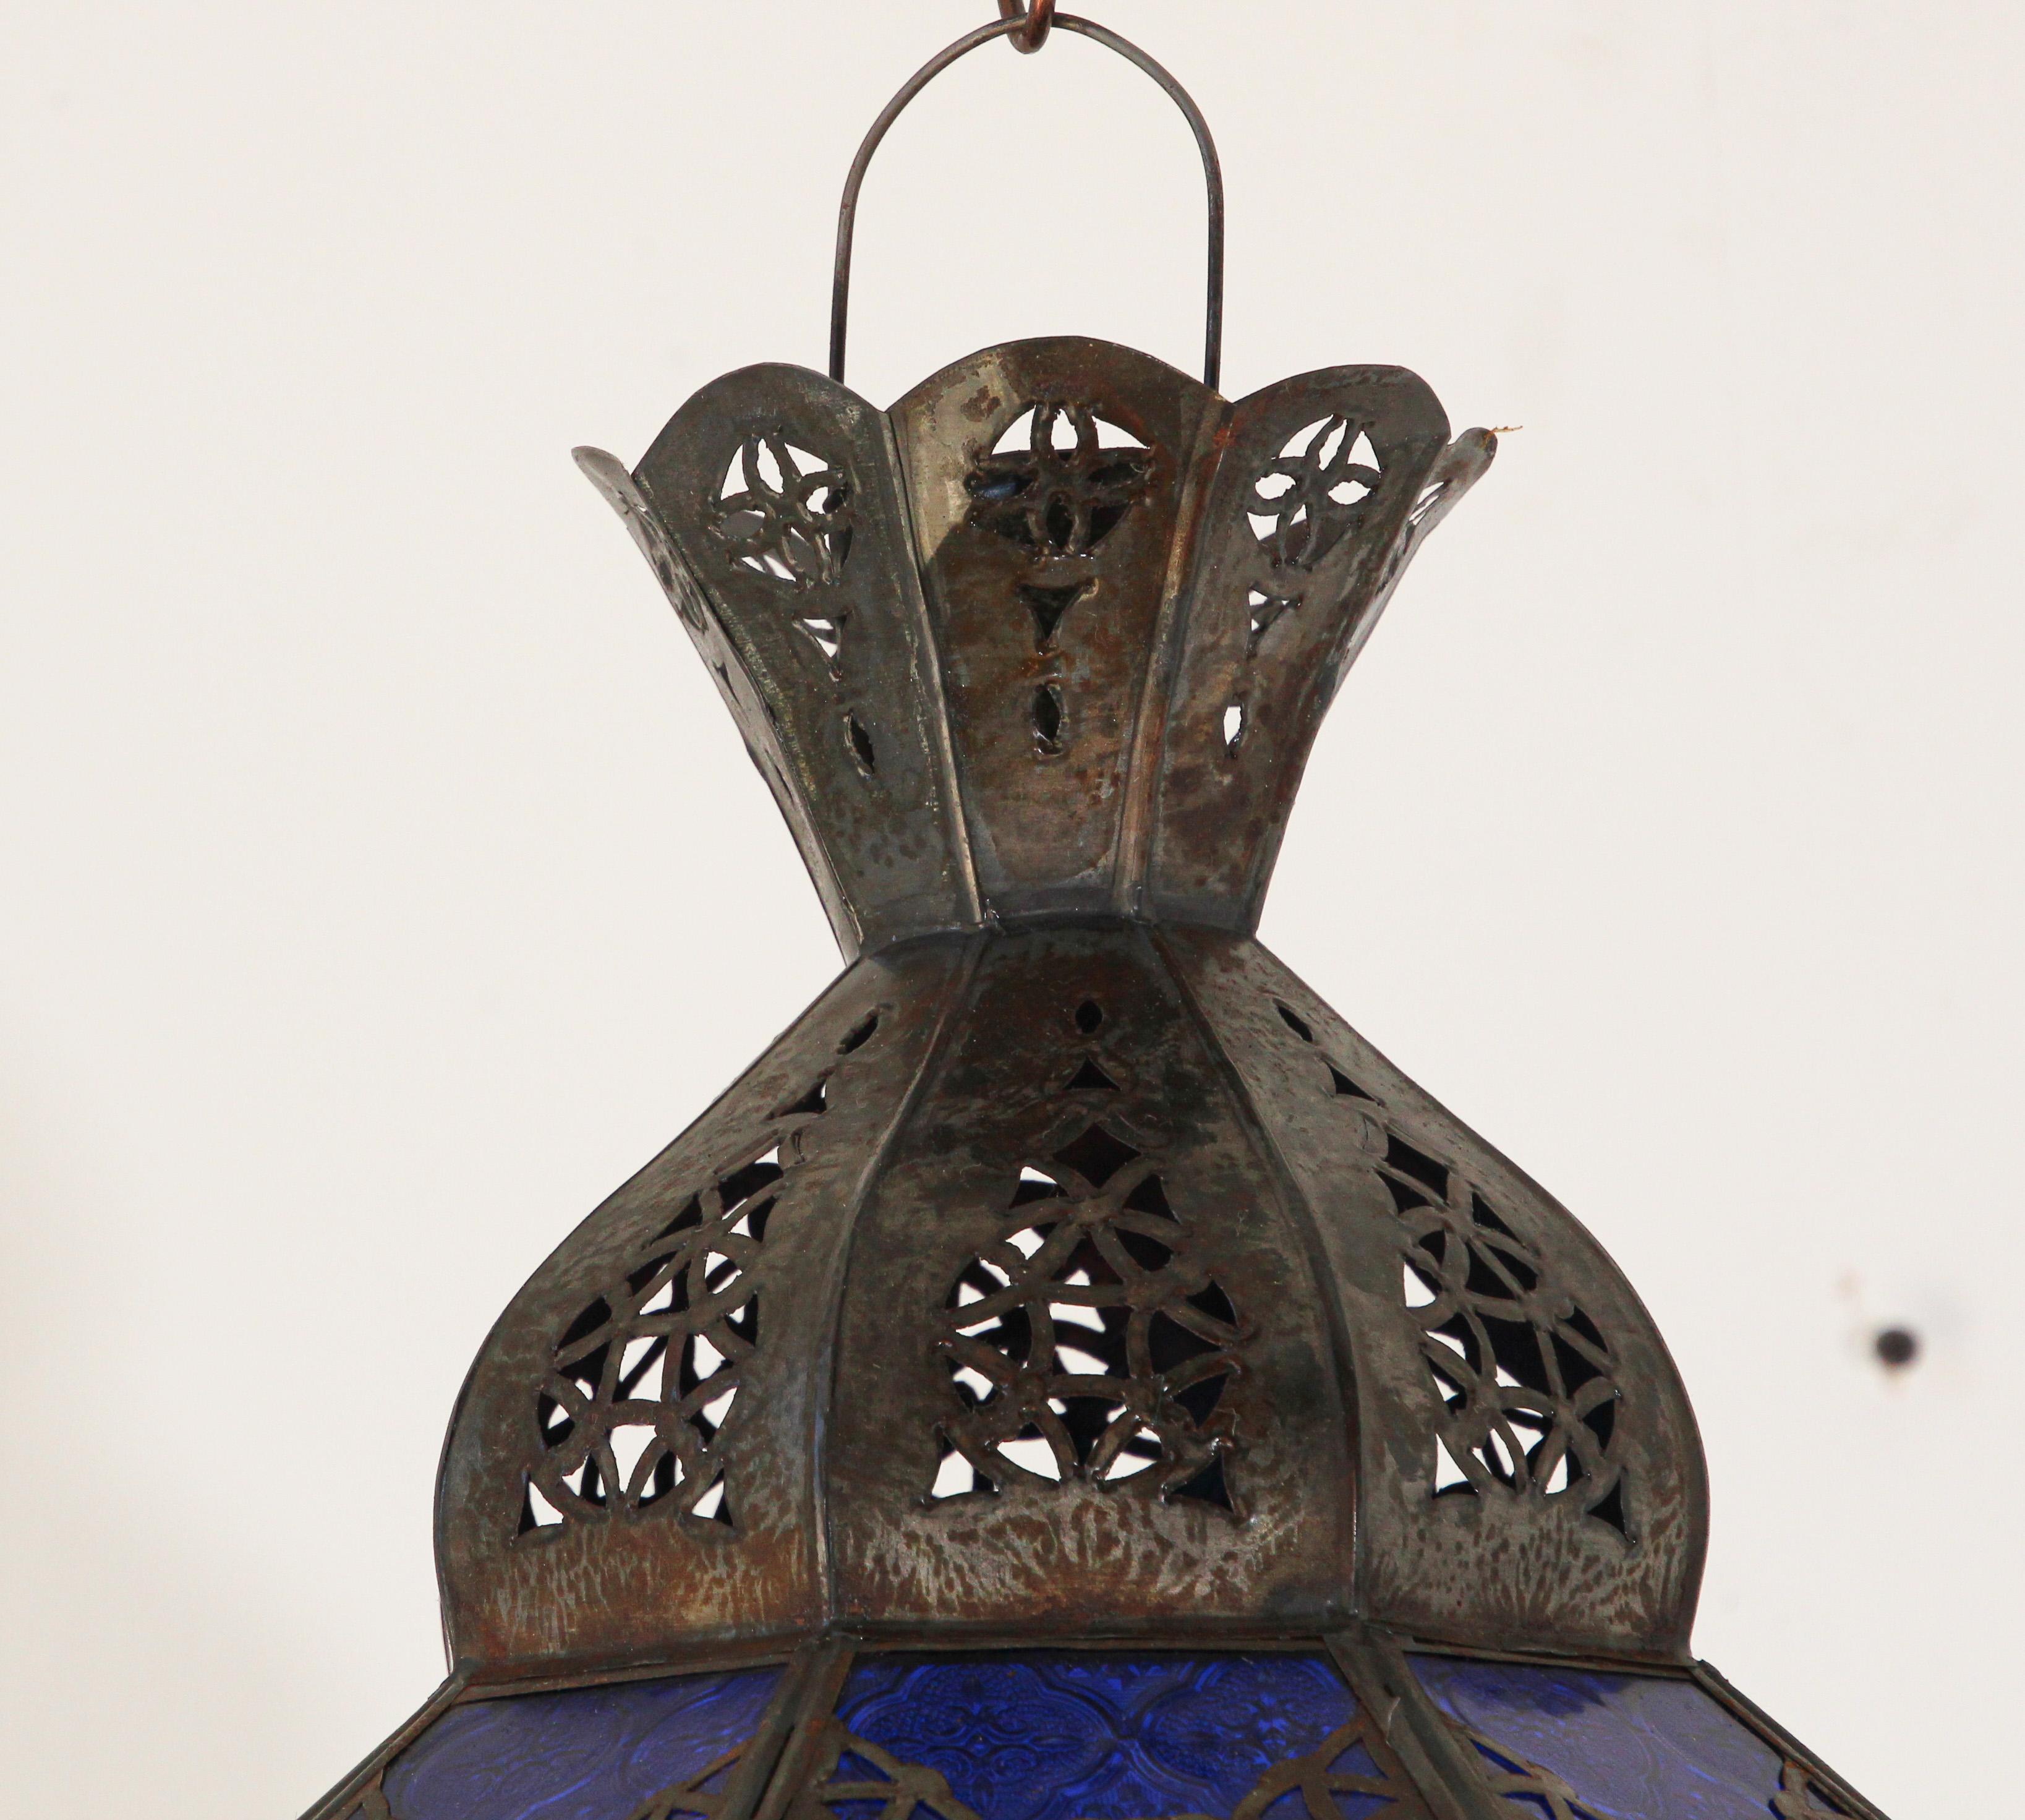 Hand-Crafted Handcrafted Moroccan Metal and Blue Glass Lantern, Octagonal Shape